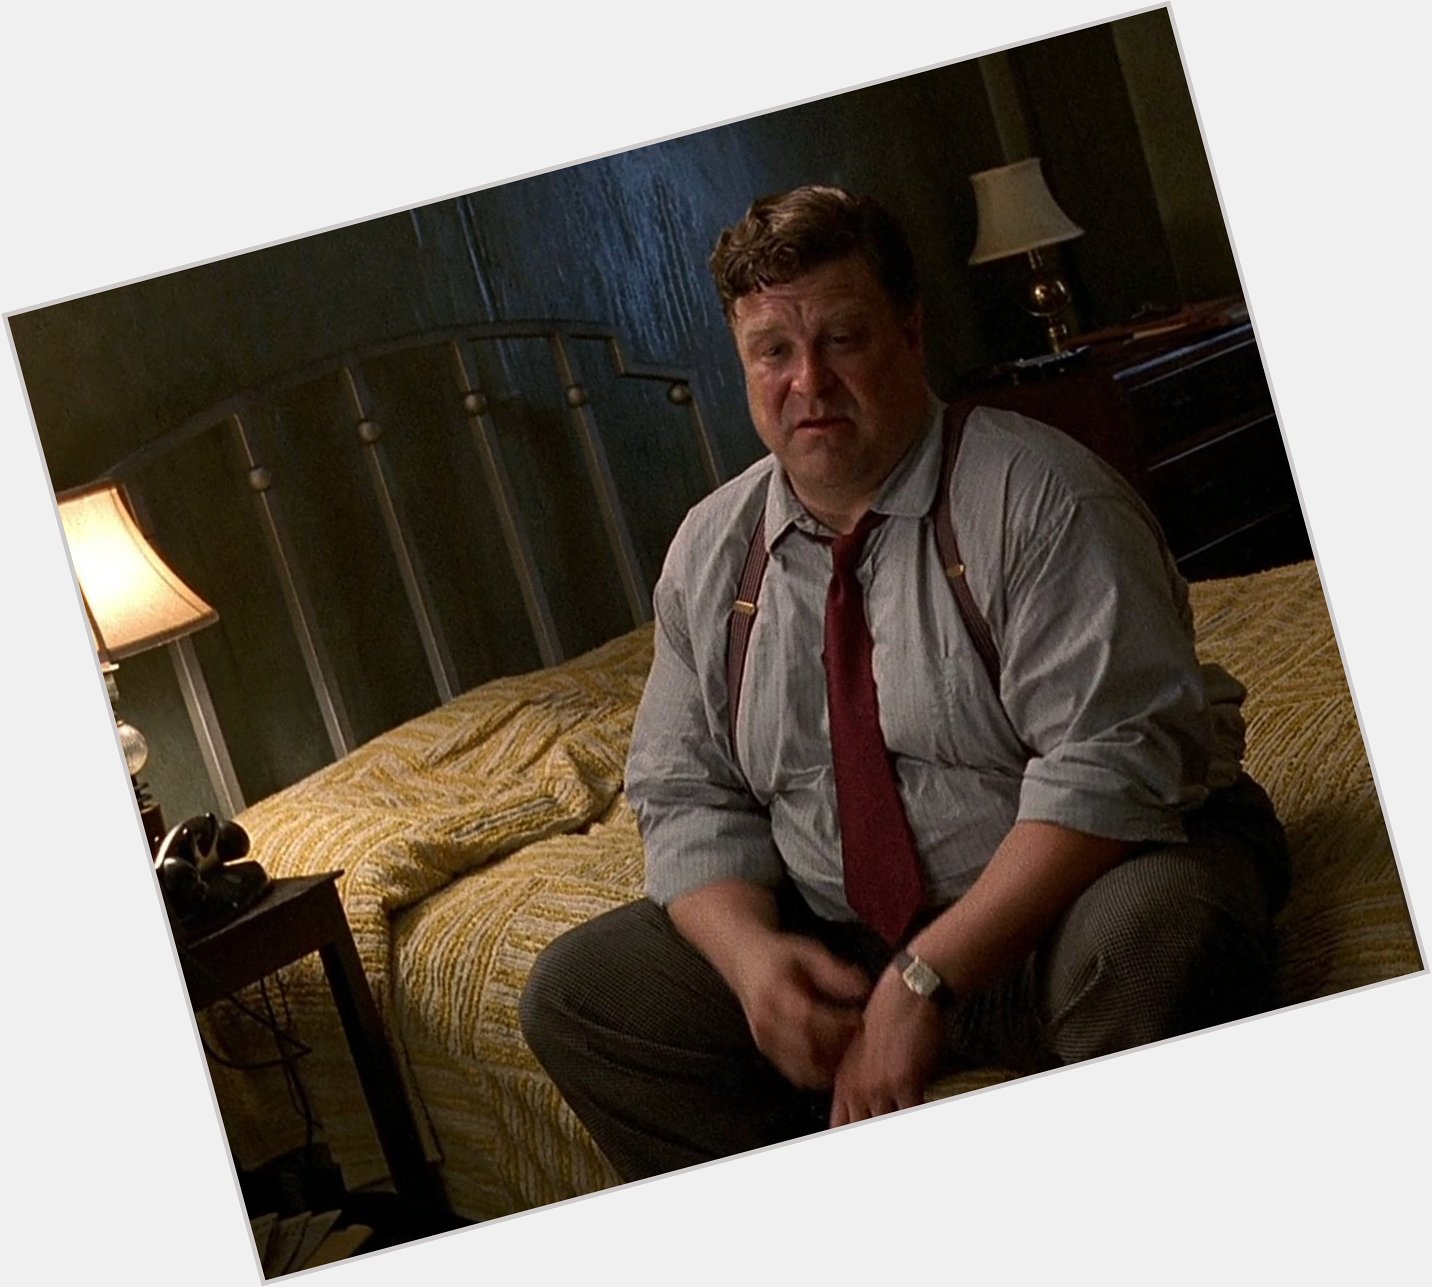 Also: happy birthday to John Goodman, seen here patiently waiting for me to join him. In bed. For sex. 